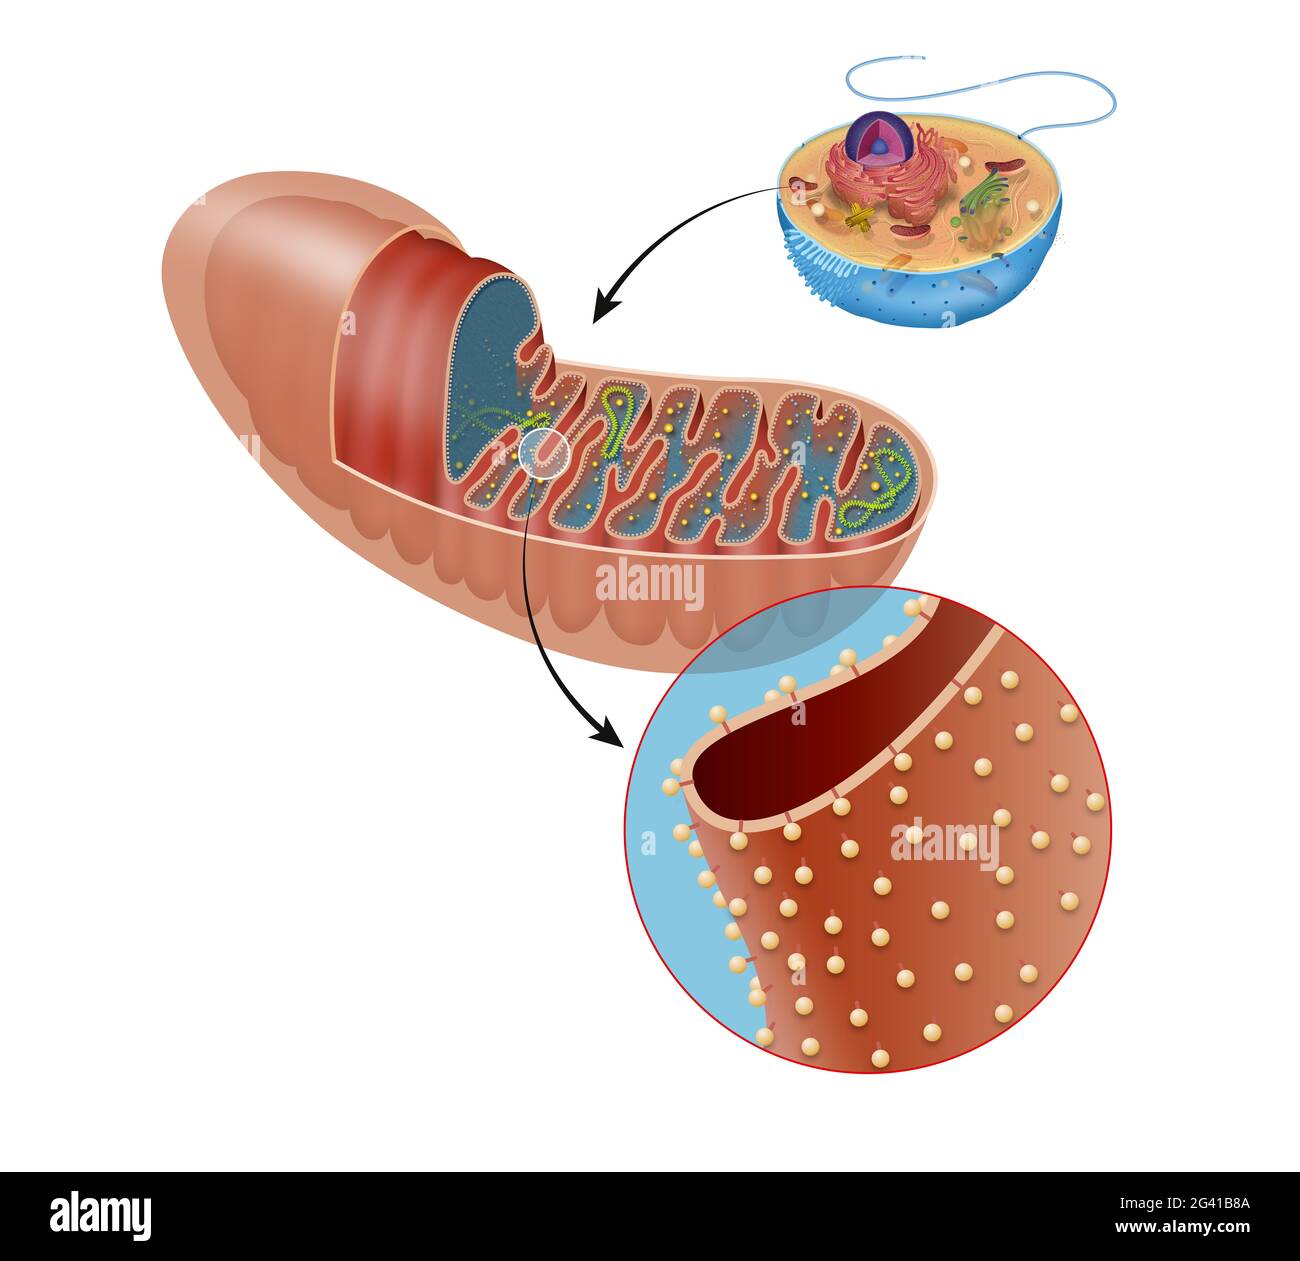 Section of mitochondria Stock Photo